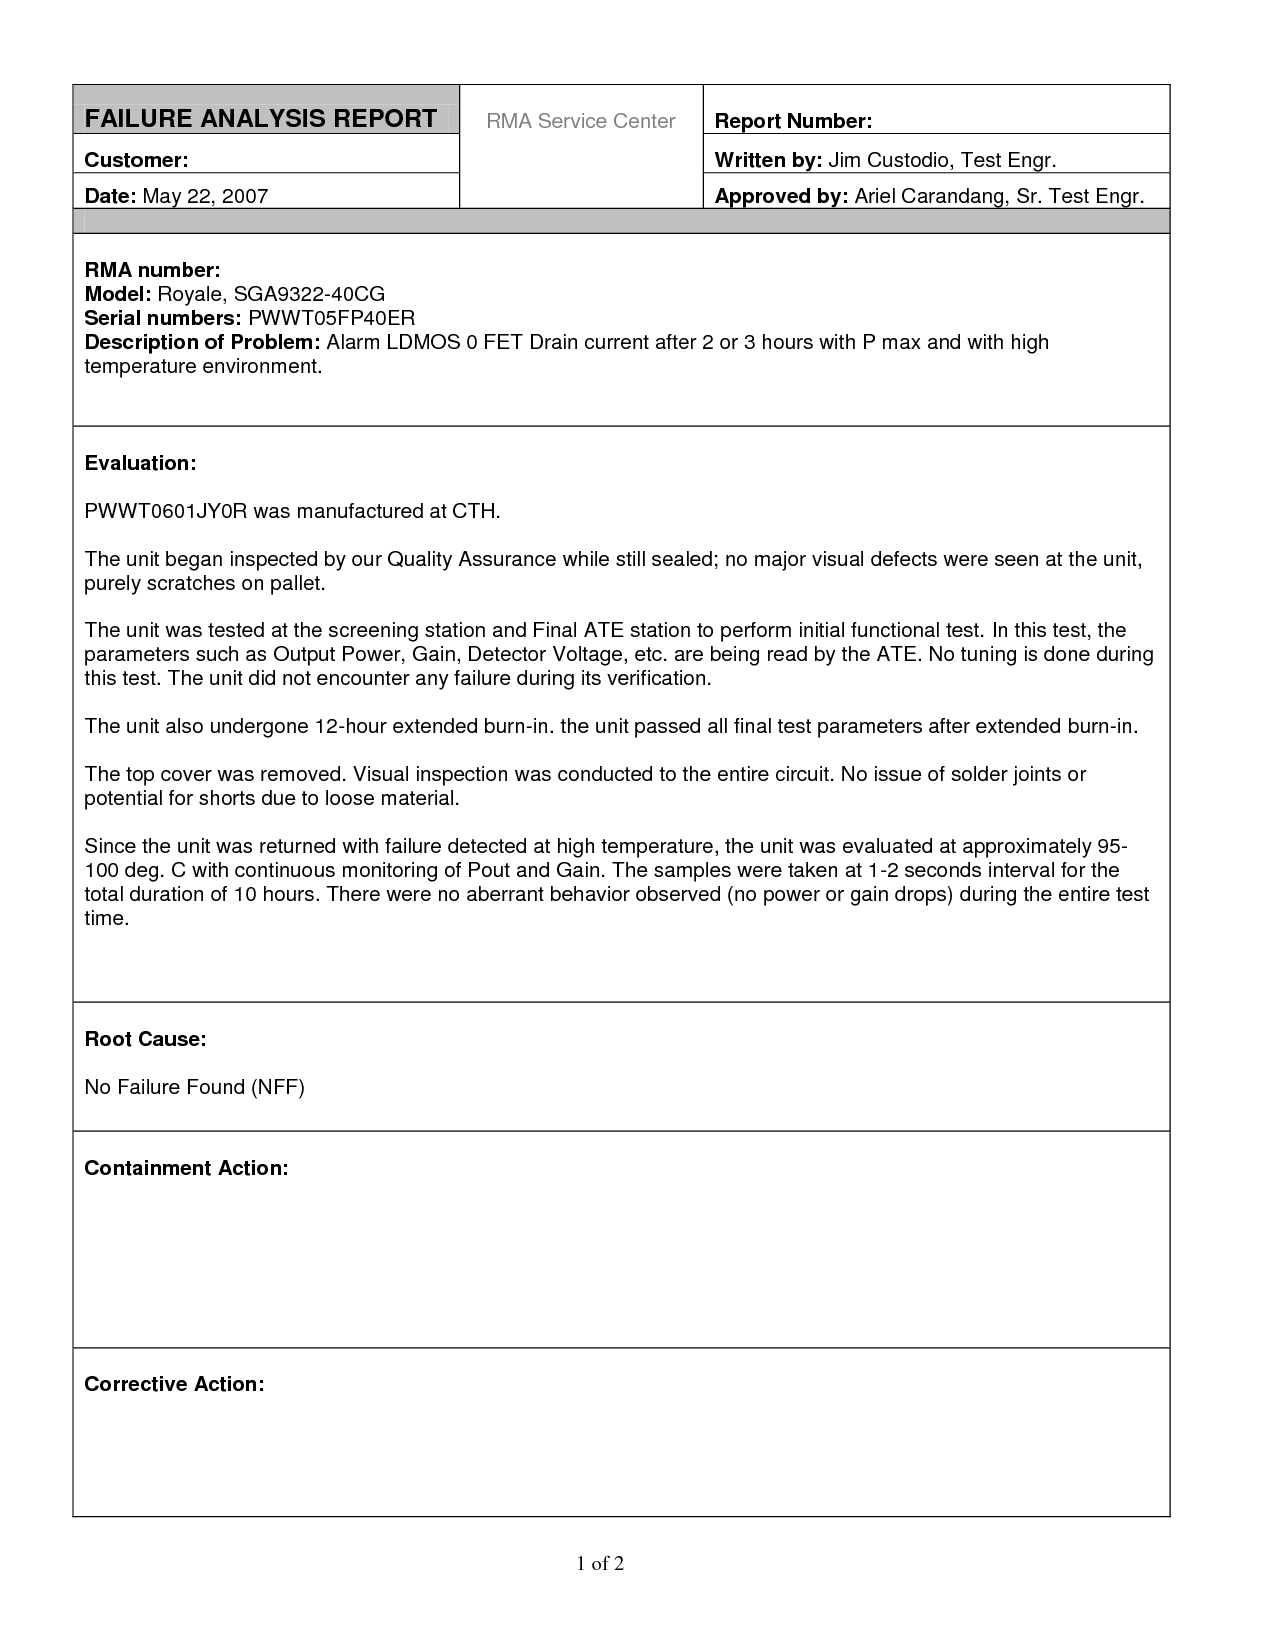 Excellent Failure Analysis Report Writtenjimcustodio34 For Post Event Evaluation Report Template